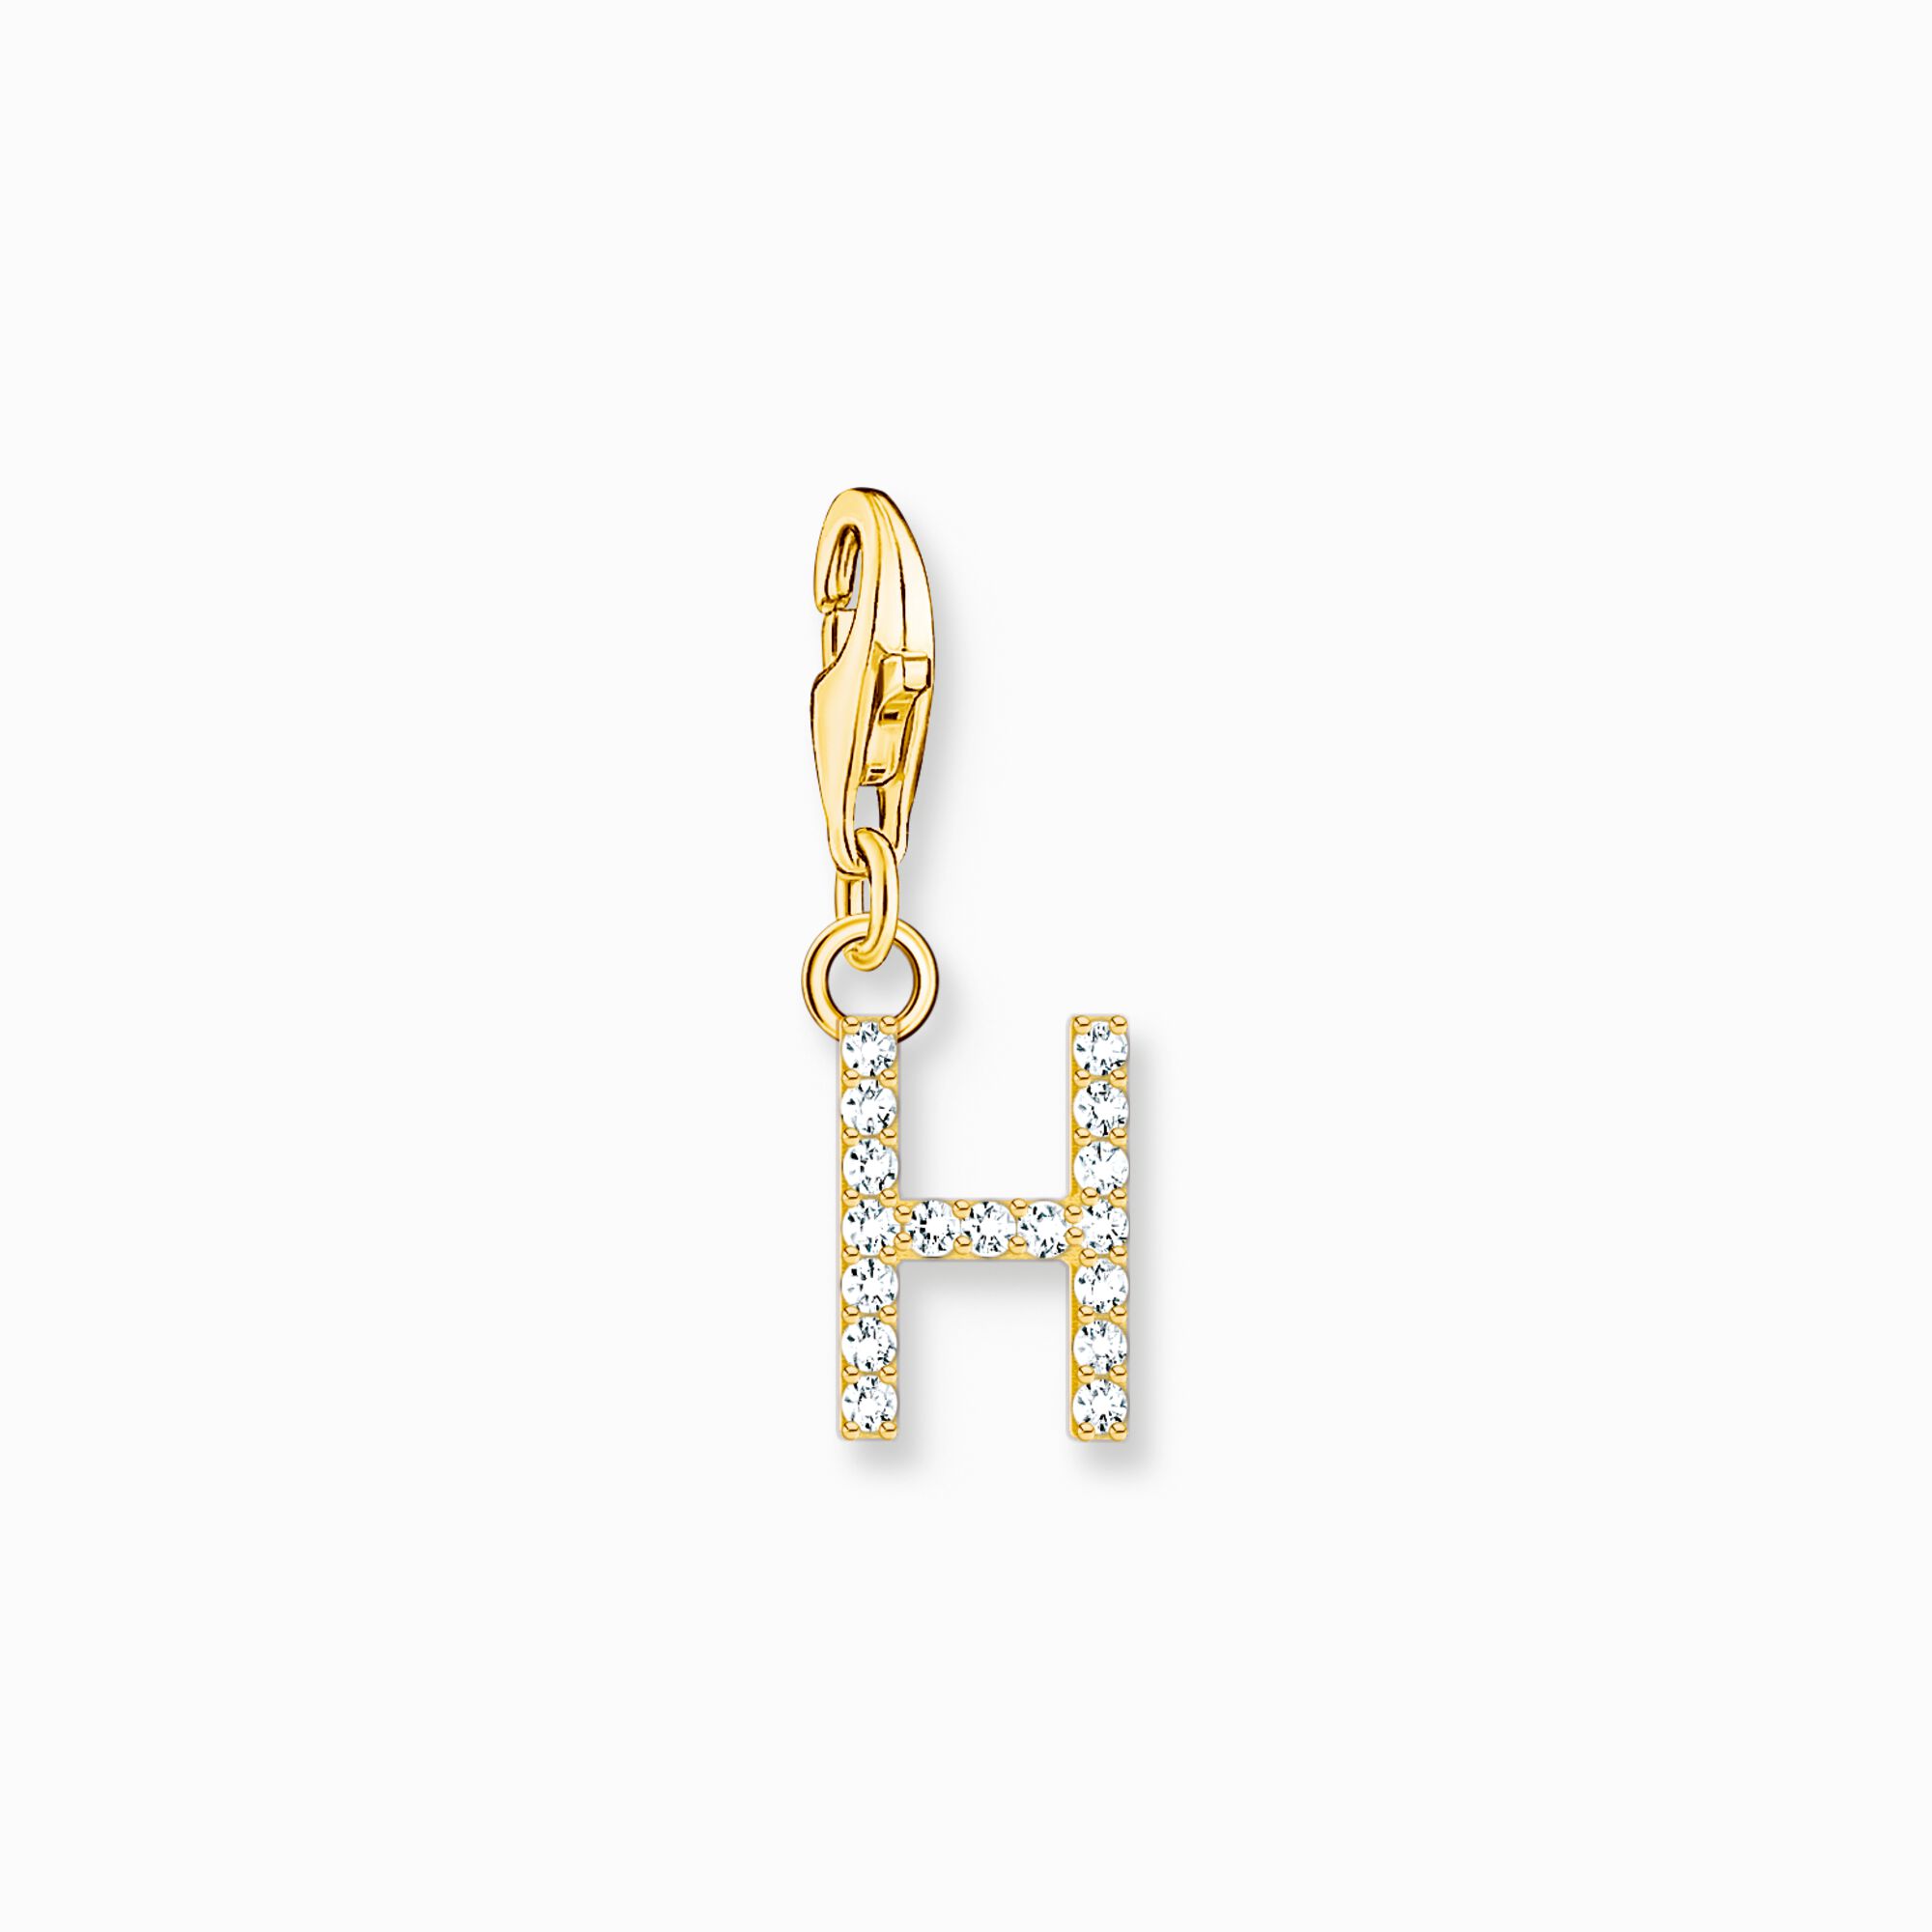 Charm pendant letter H with white stones gold plated from the Charm Club collection in the THOMAS SABO online store